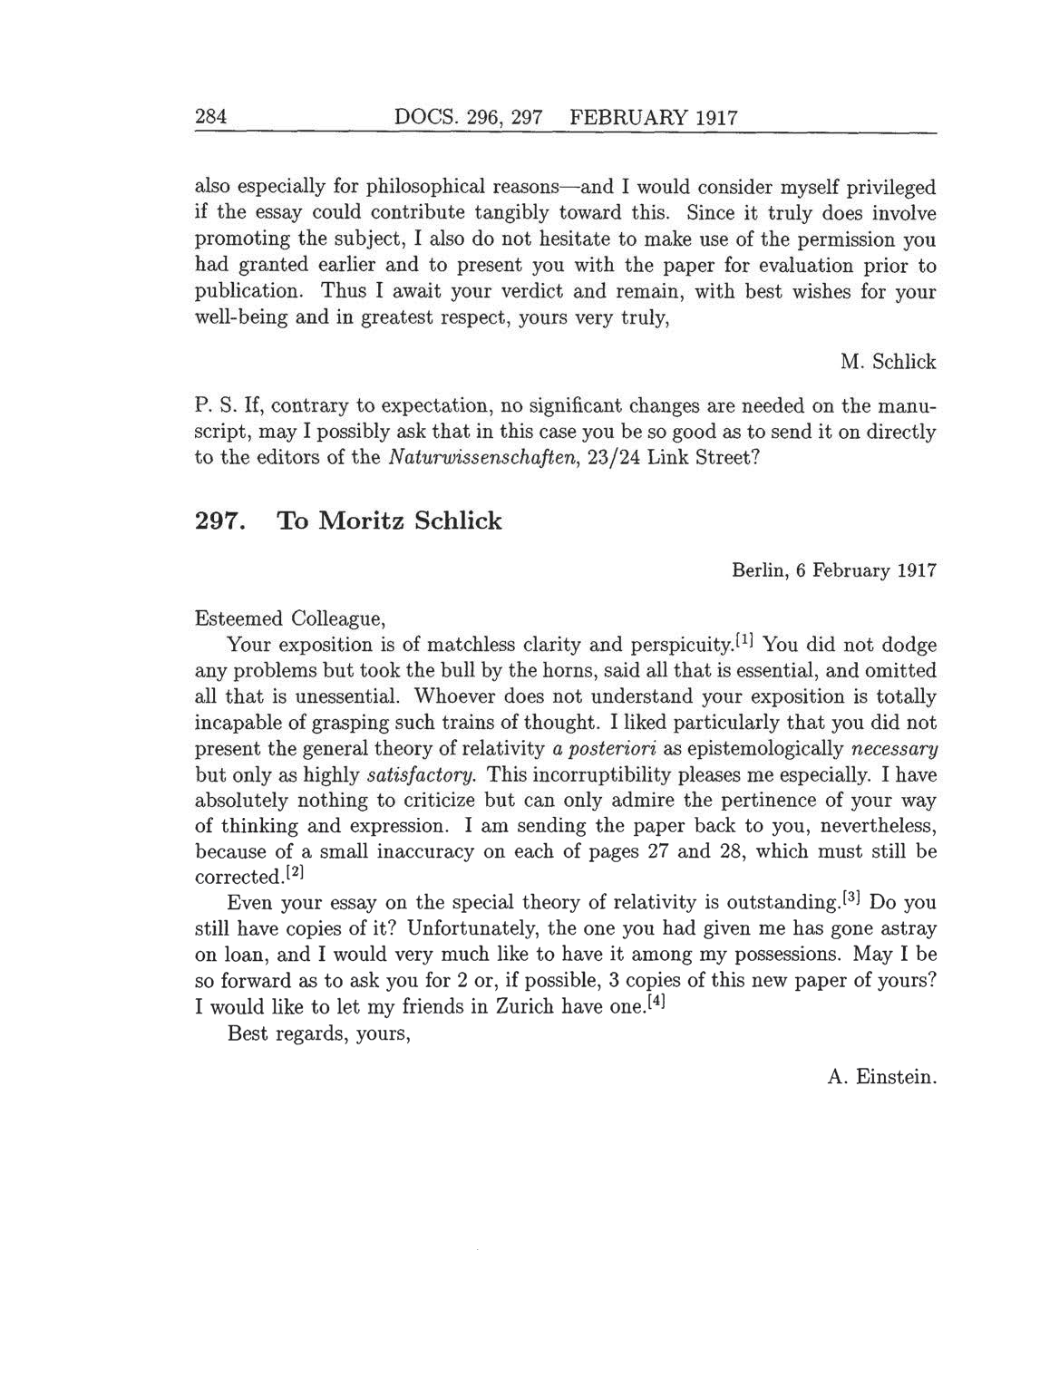 Volume 8: The Berlin Years: Correspondence, 1914-1918 (English translation supplement) page 284